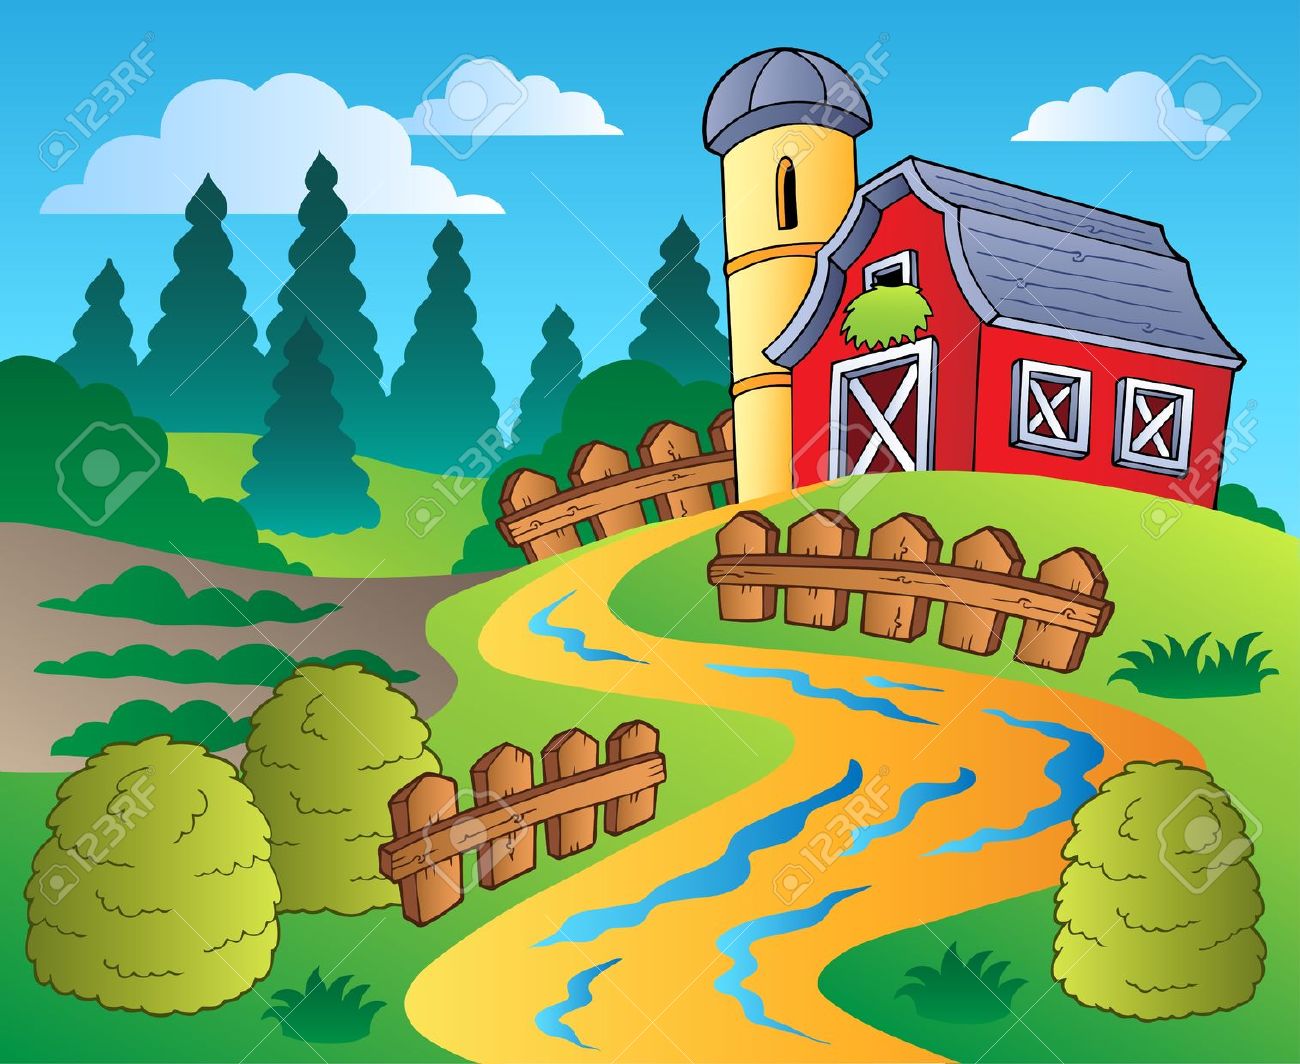 country clipart country scenery